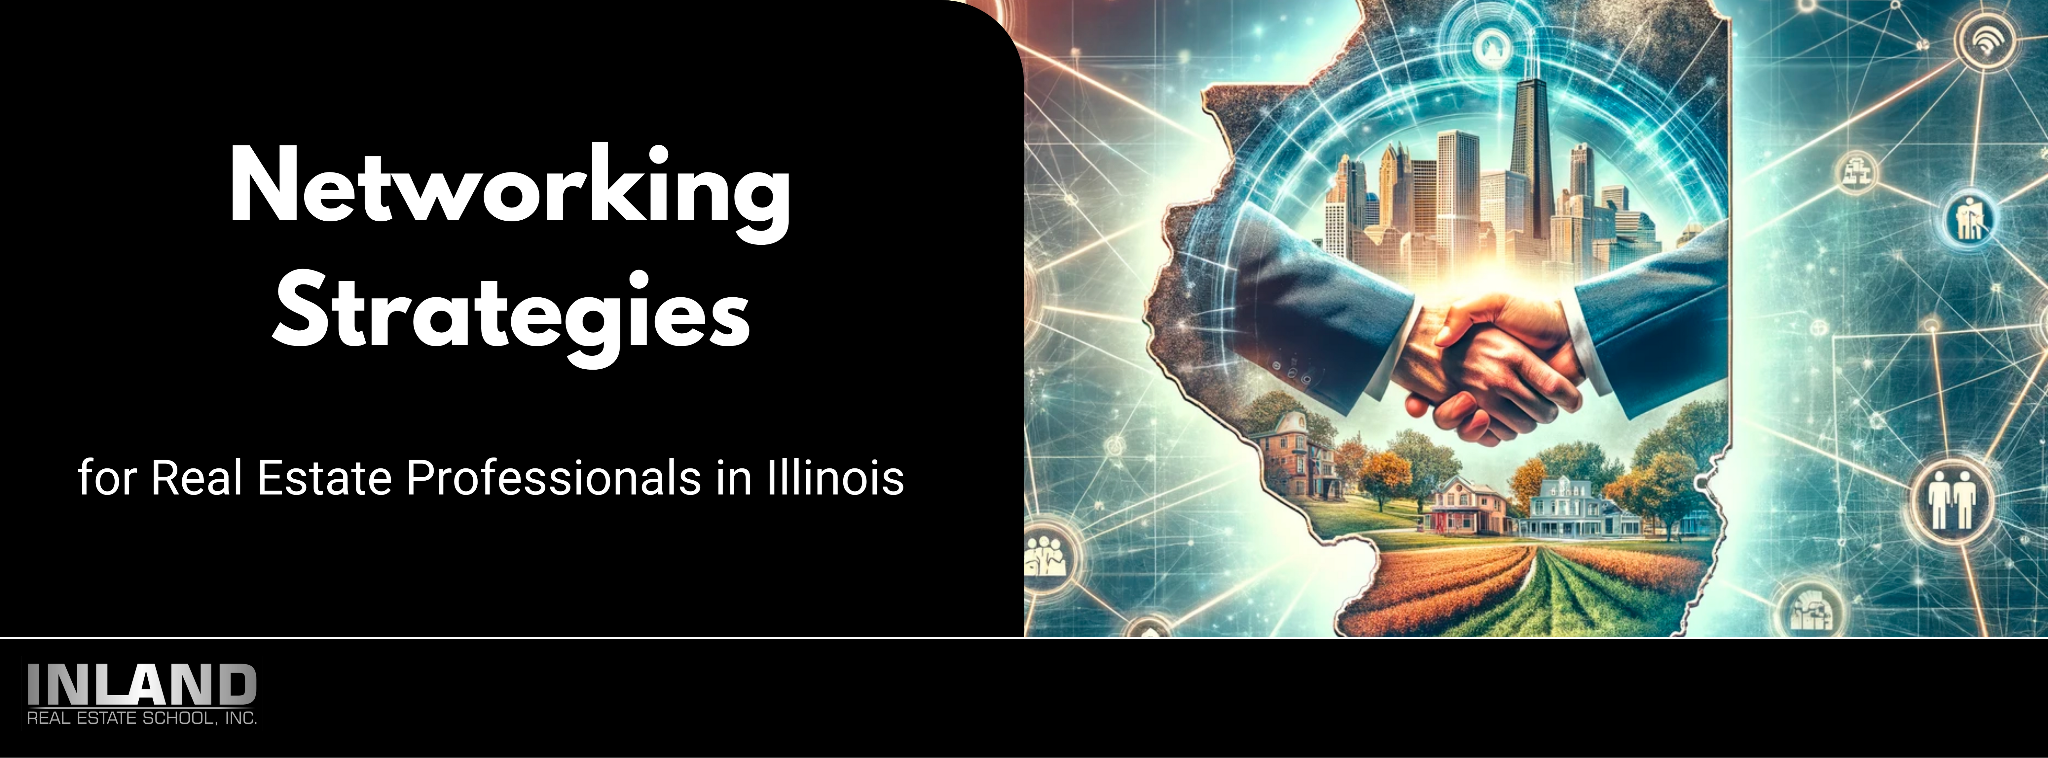 Networking Strategies for Real Estate Professionals in Illinois